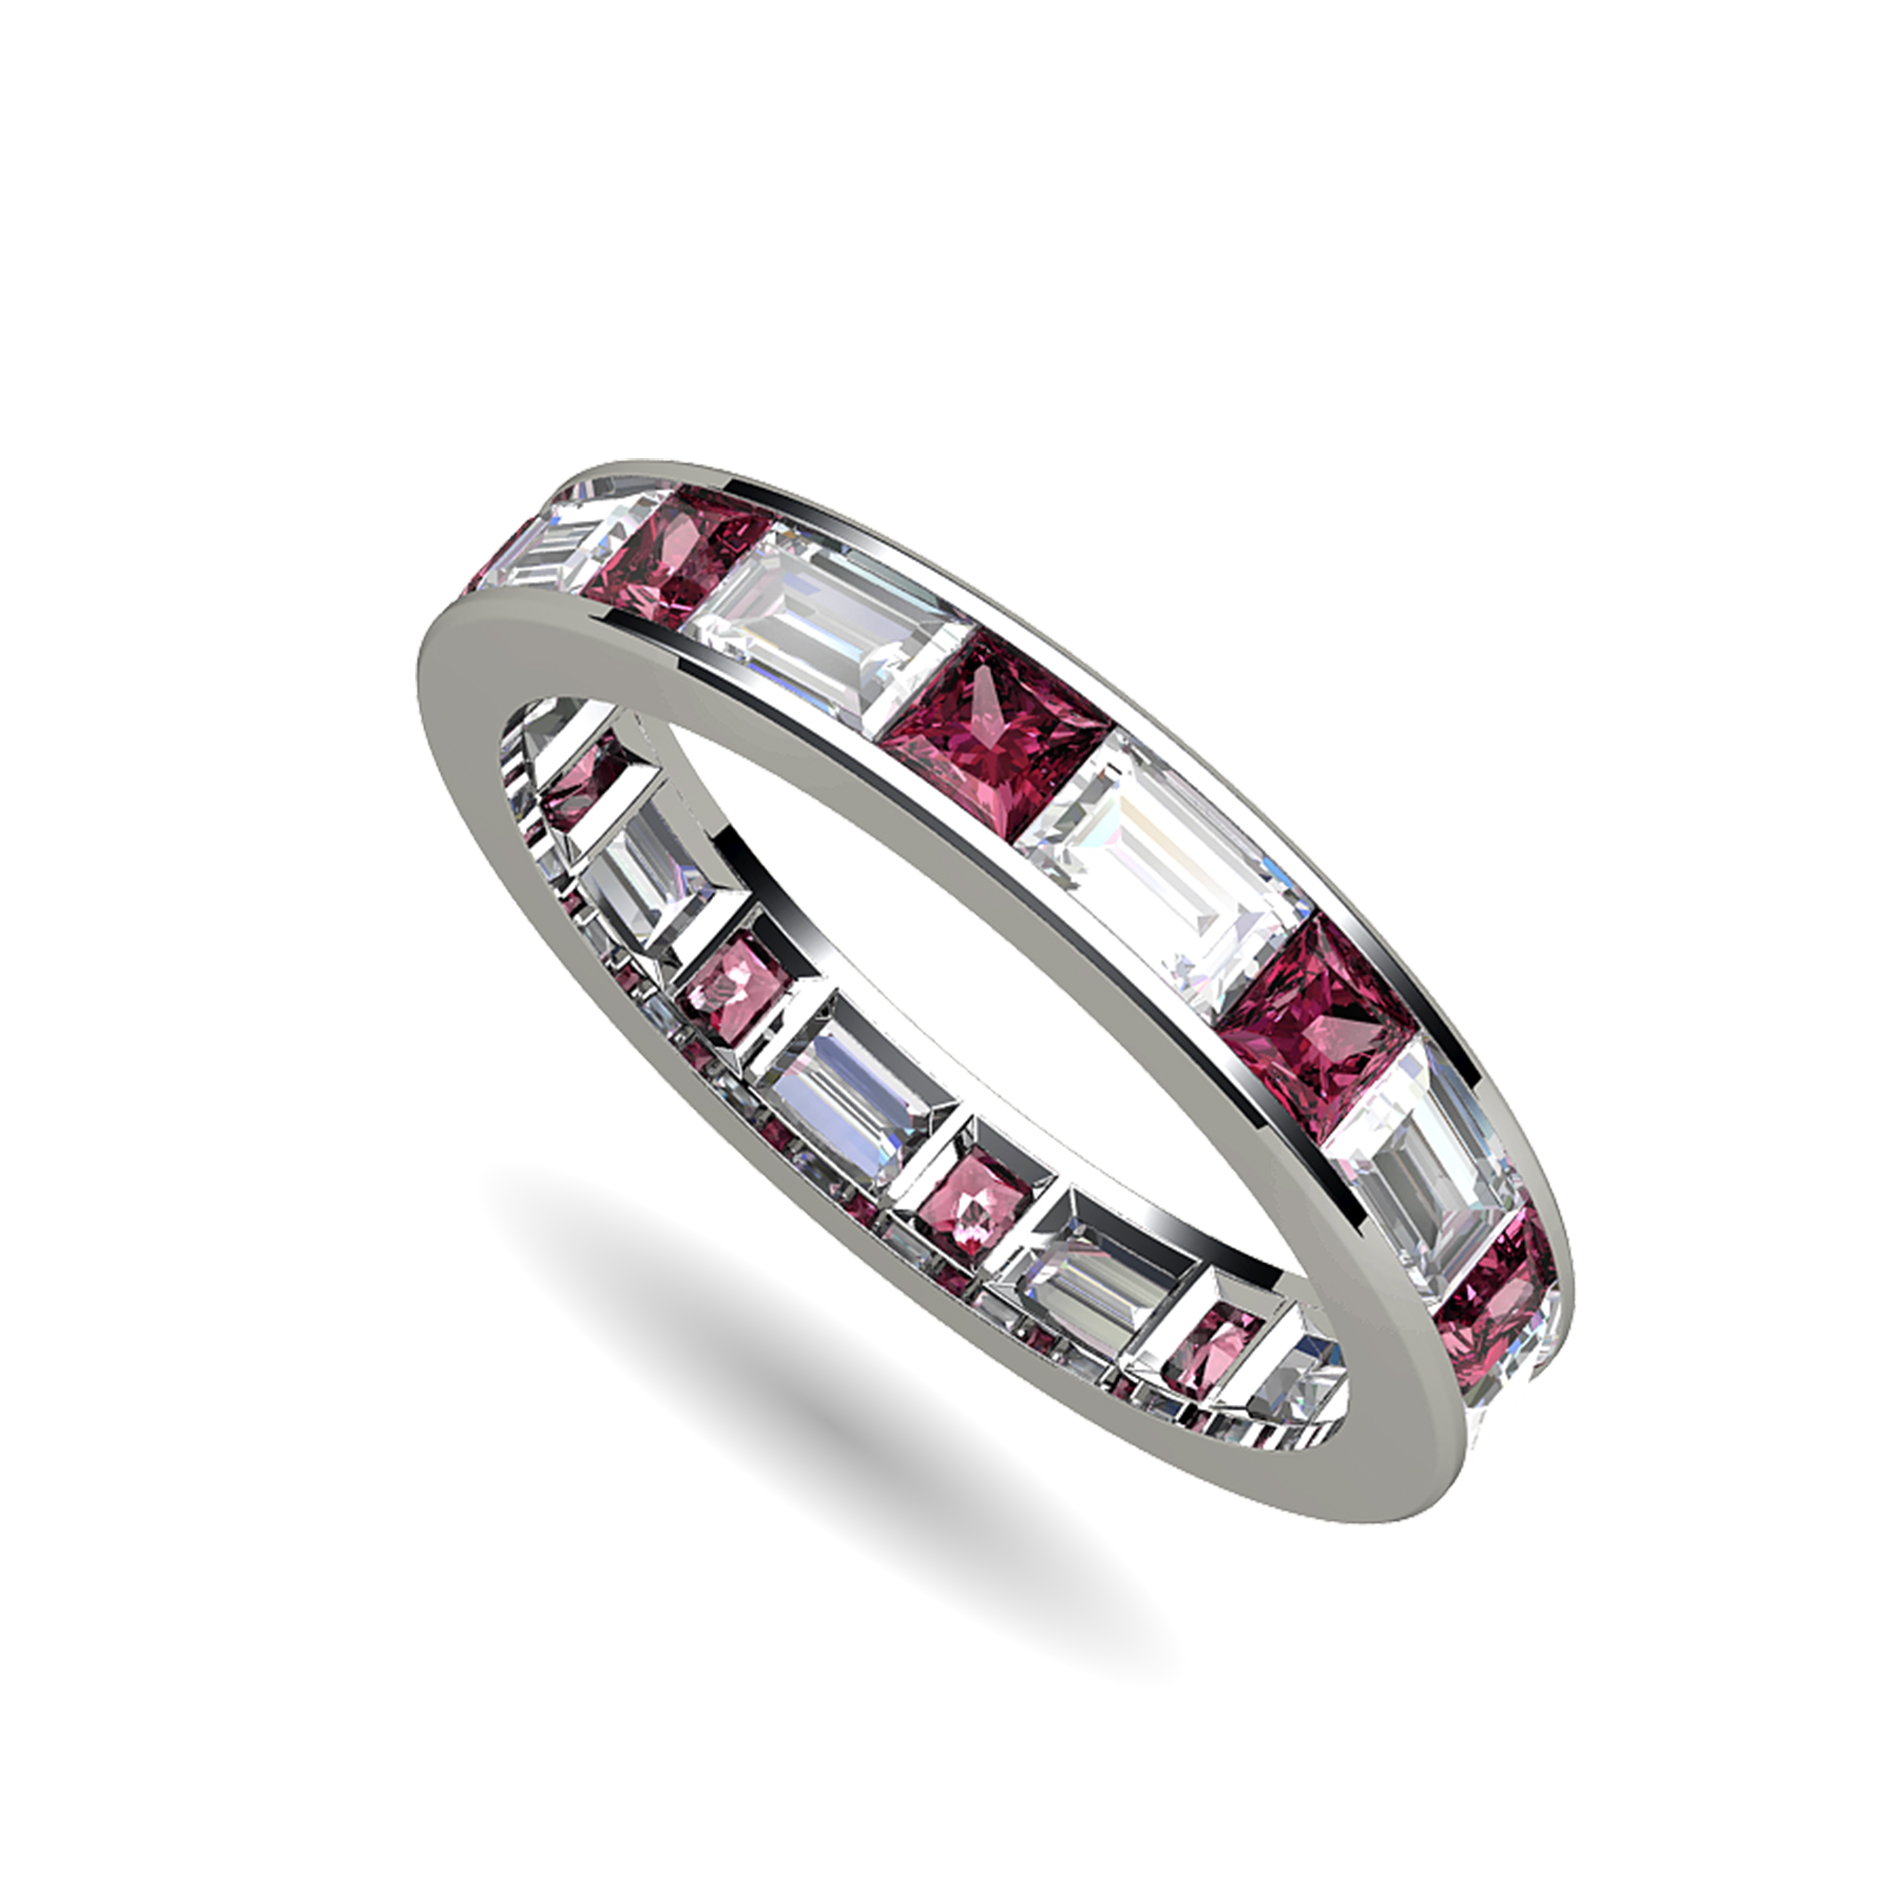 Platinum Channel Set Ring With Baguette and Princess Cut Diamonds and Ruby